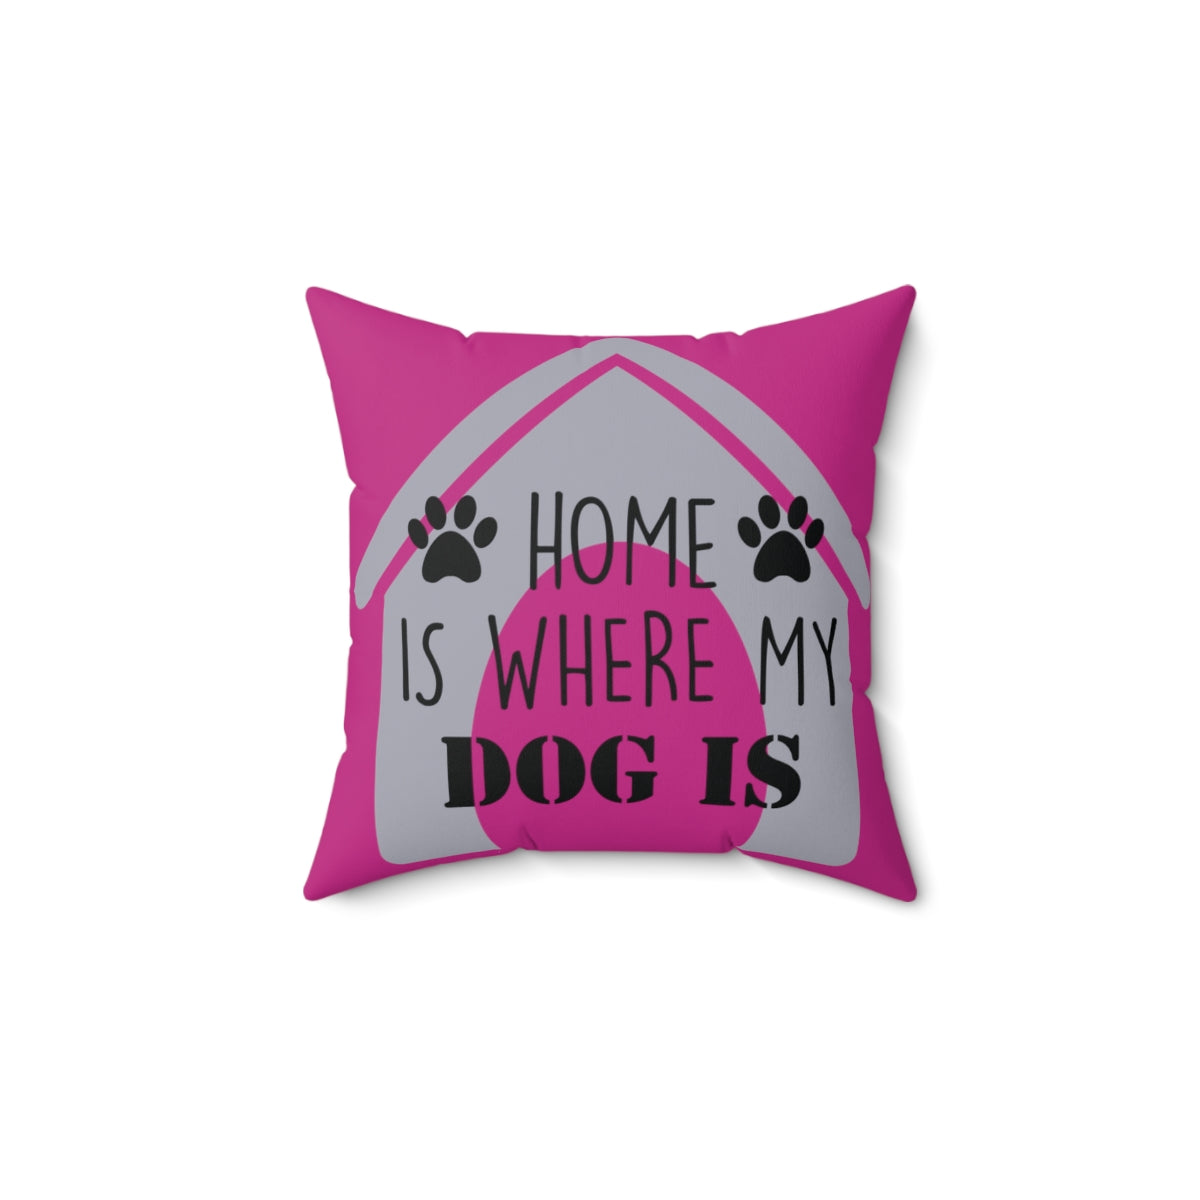 Pink Square Pillow Case - Home Is Where My Dog Is - Home Decor Pillow Cover - Accent Pillow Cover